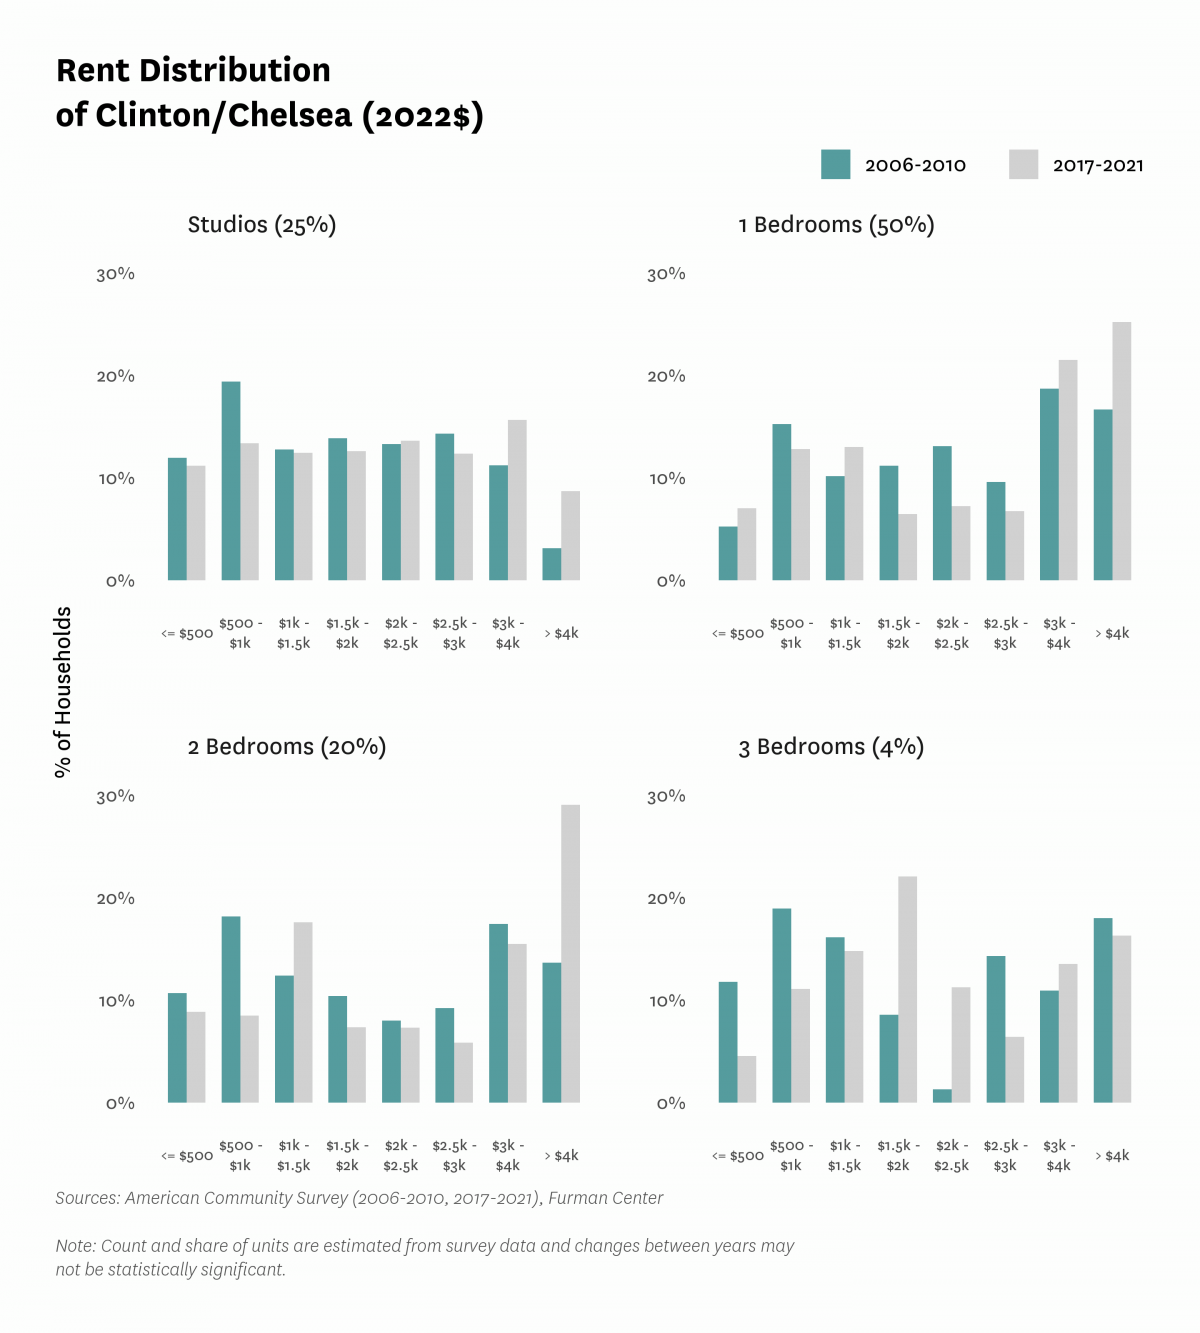 Graph showing the distribution of rents in Clinton/Chelsea in both 2010 and 2017-2021.